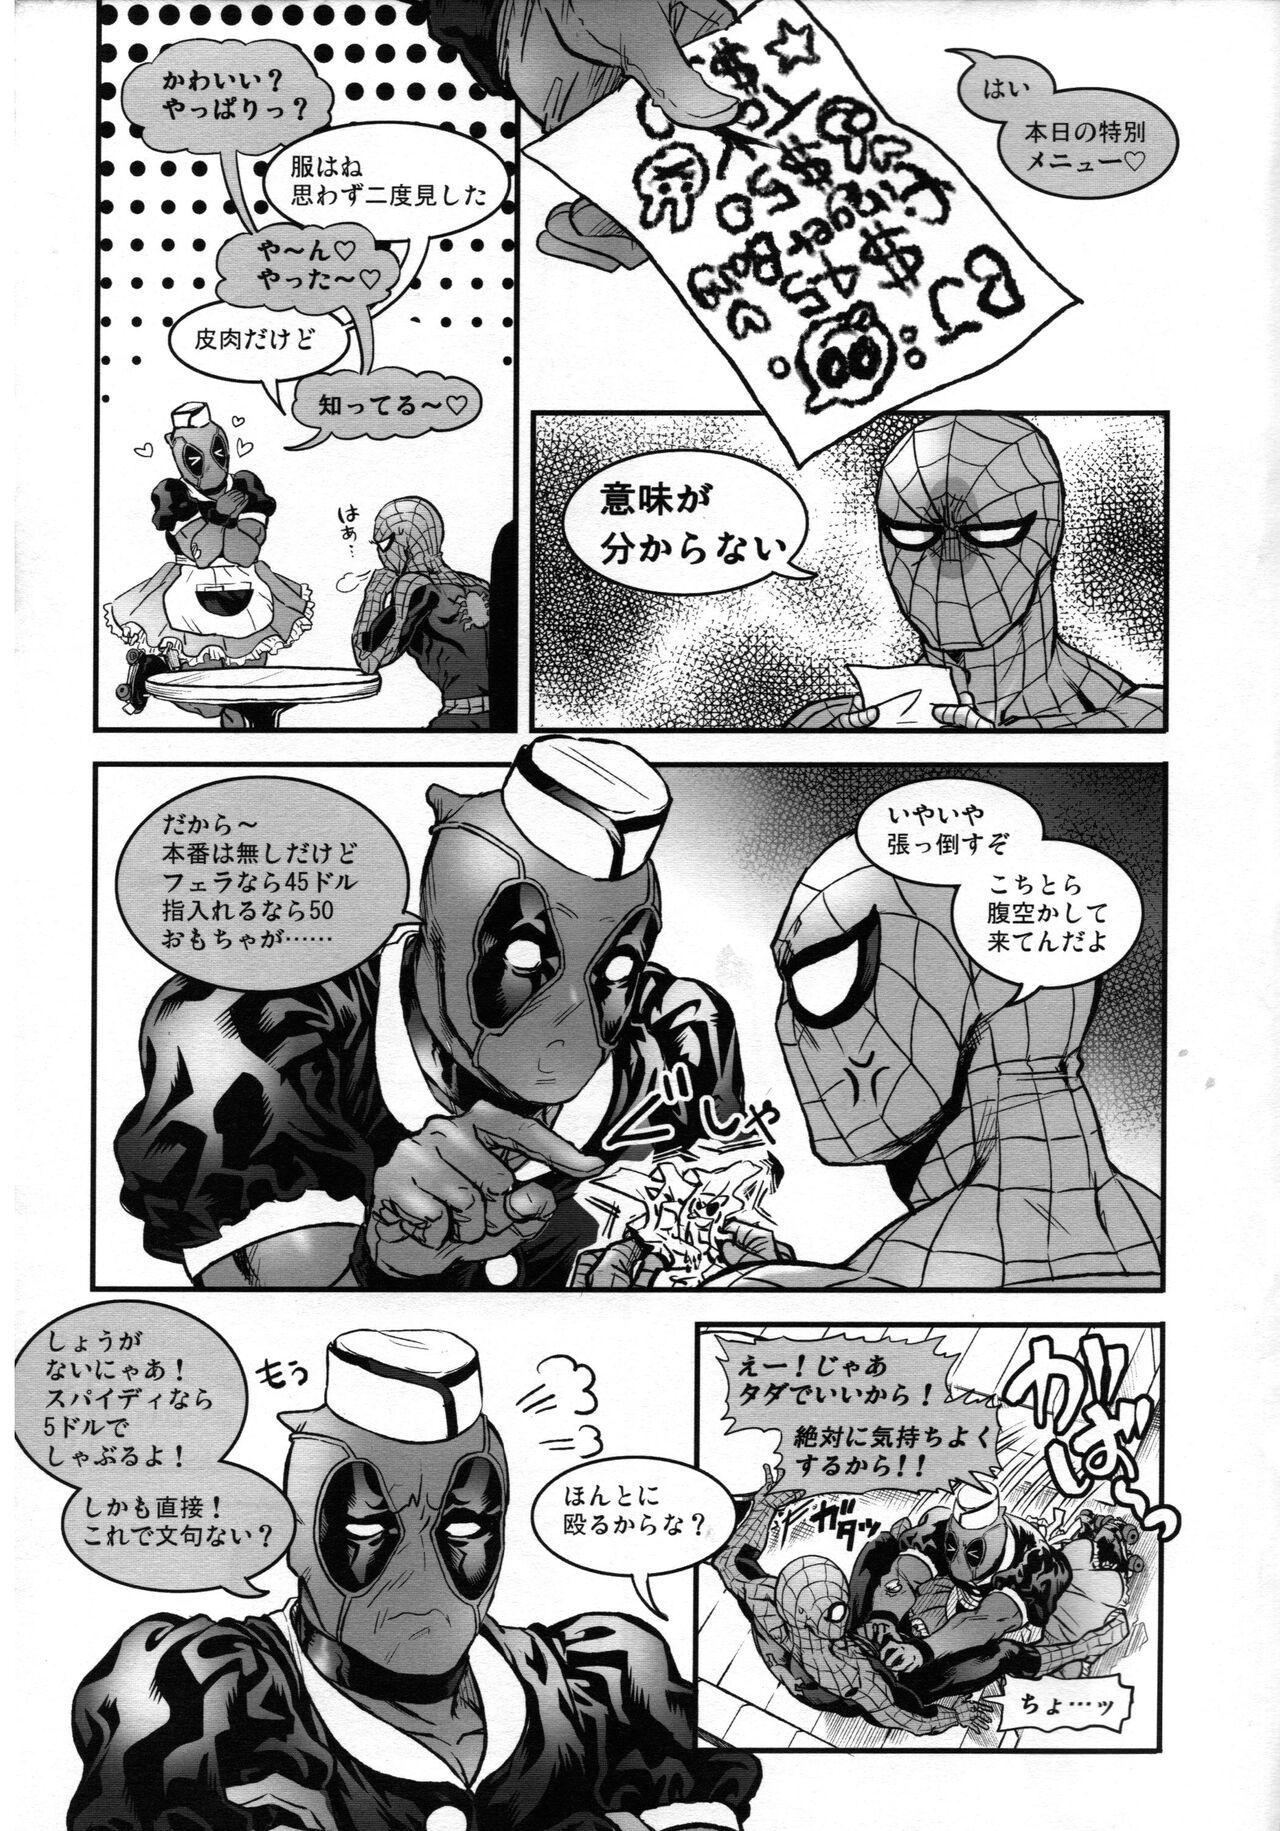 Carro TAKE OUT! - Spider man Deadpool Sharing - Page 4